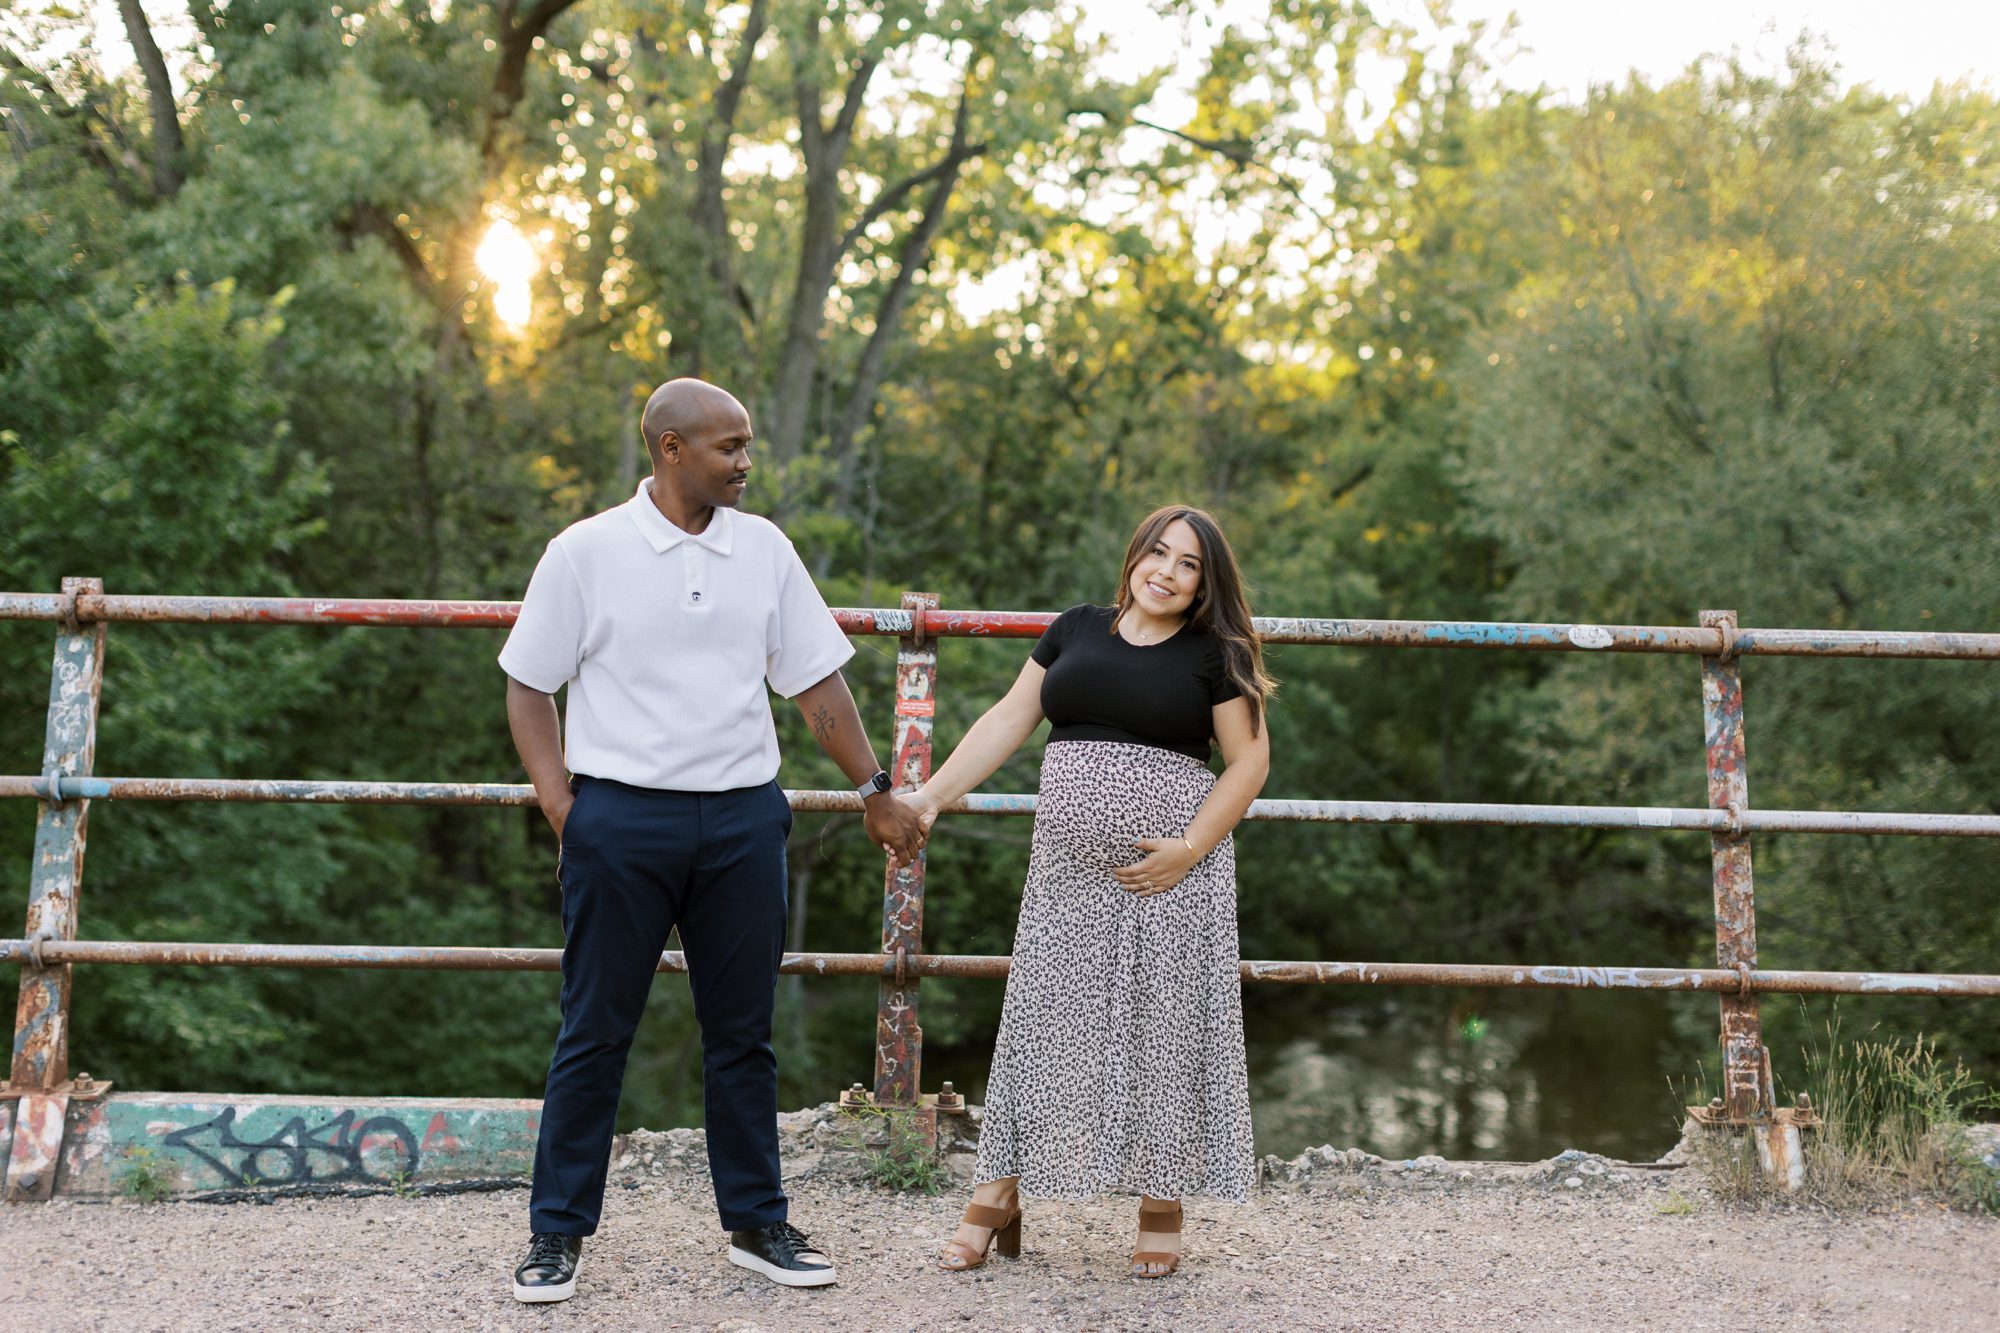 Man and woman hold hands during outdoor summer Chicago maternity photoshoot